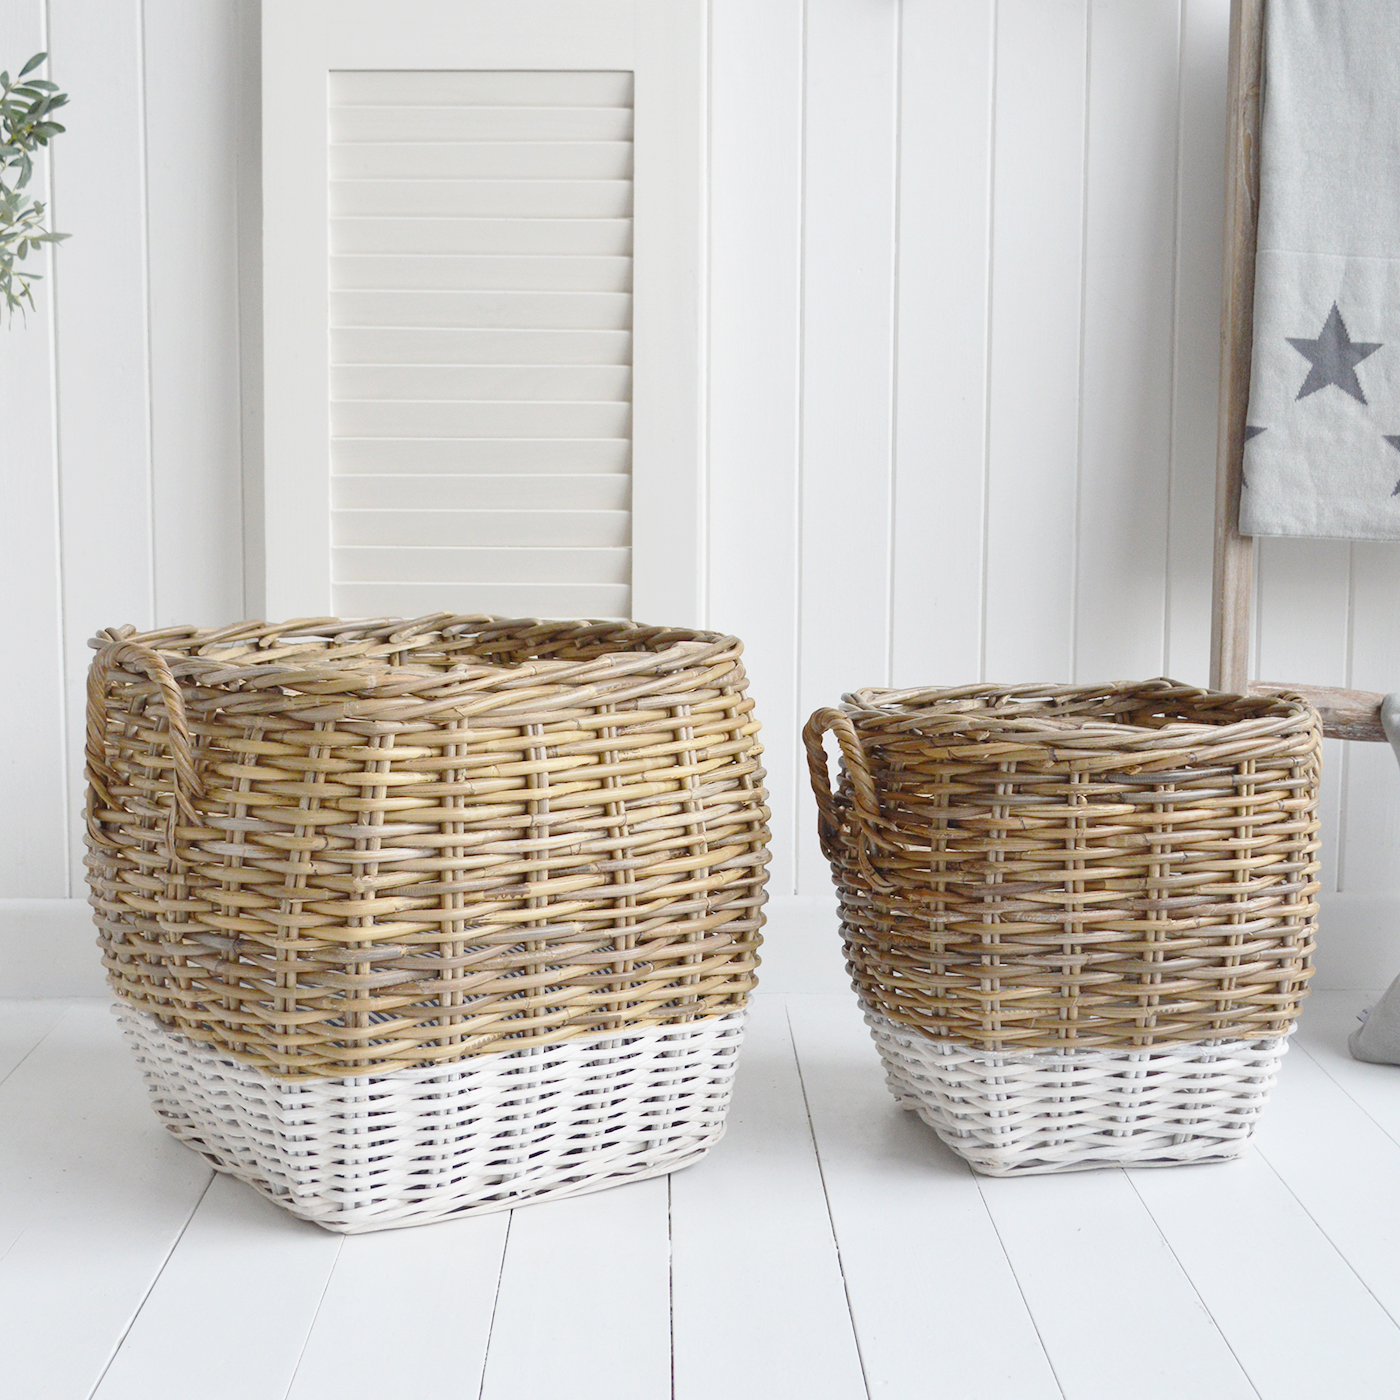 Farmington Square baskets in grey and white with handles for logs, toys and everyday storage from The White Lighthouse Furniture and Home Interiors for New England, modern farmhouse country, coastal and city homes for hallway, living room, bedroom and bathroom